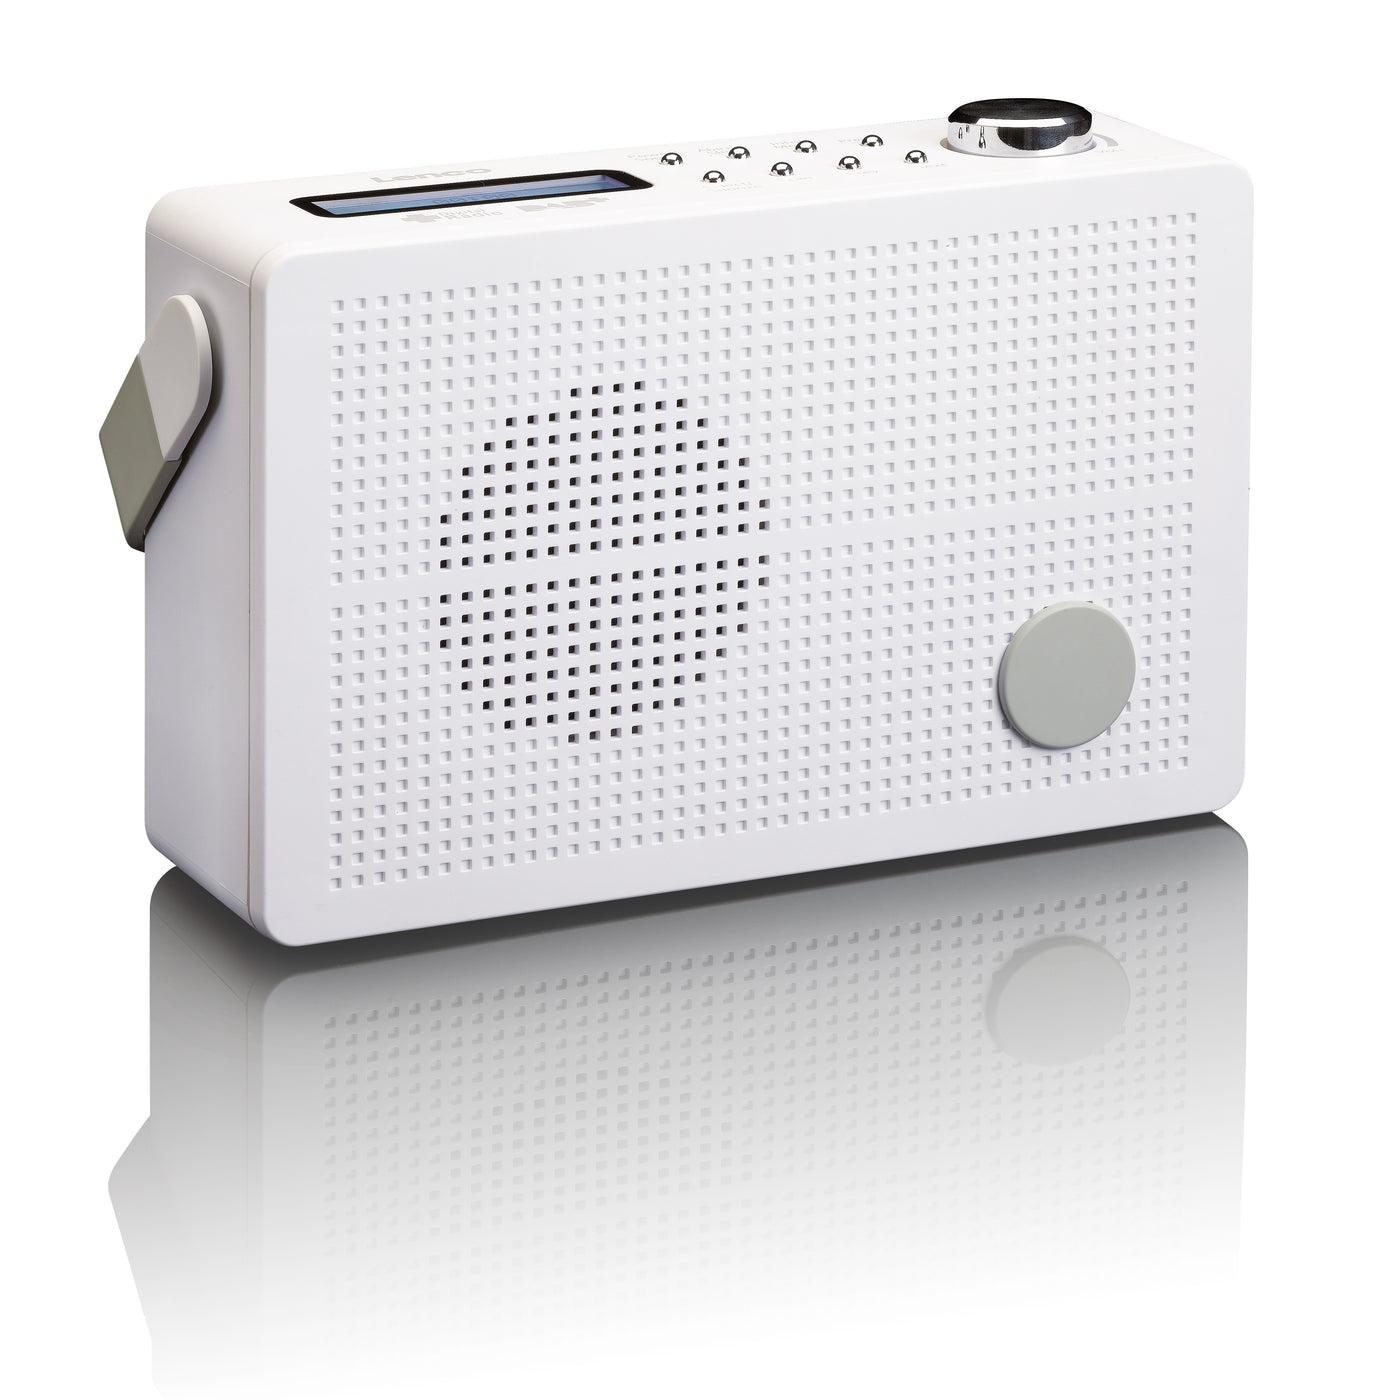 LENCO PDR-030WH - Portable DAB+/FM radio with alarm function - White